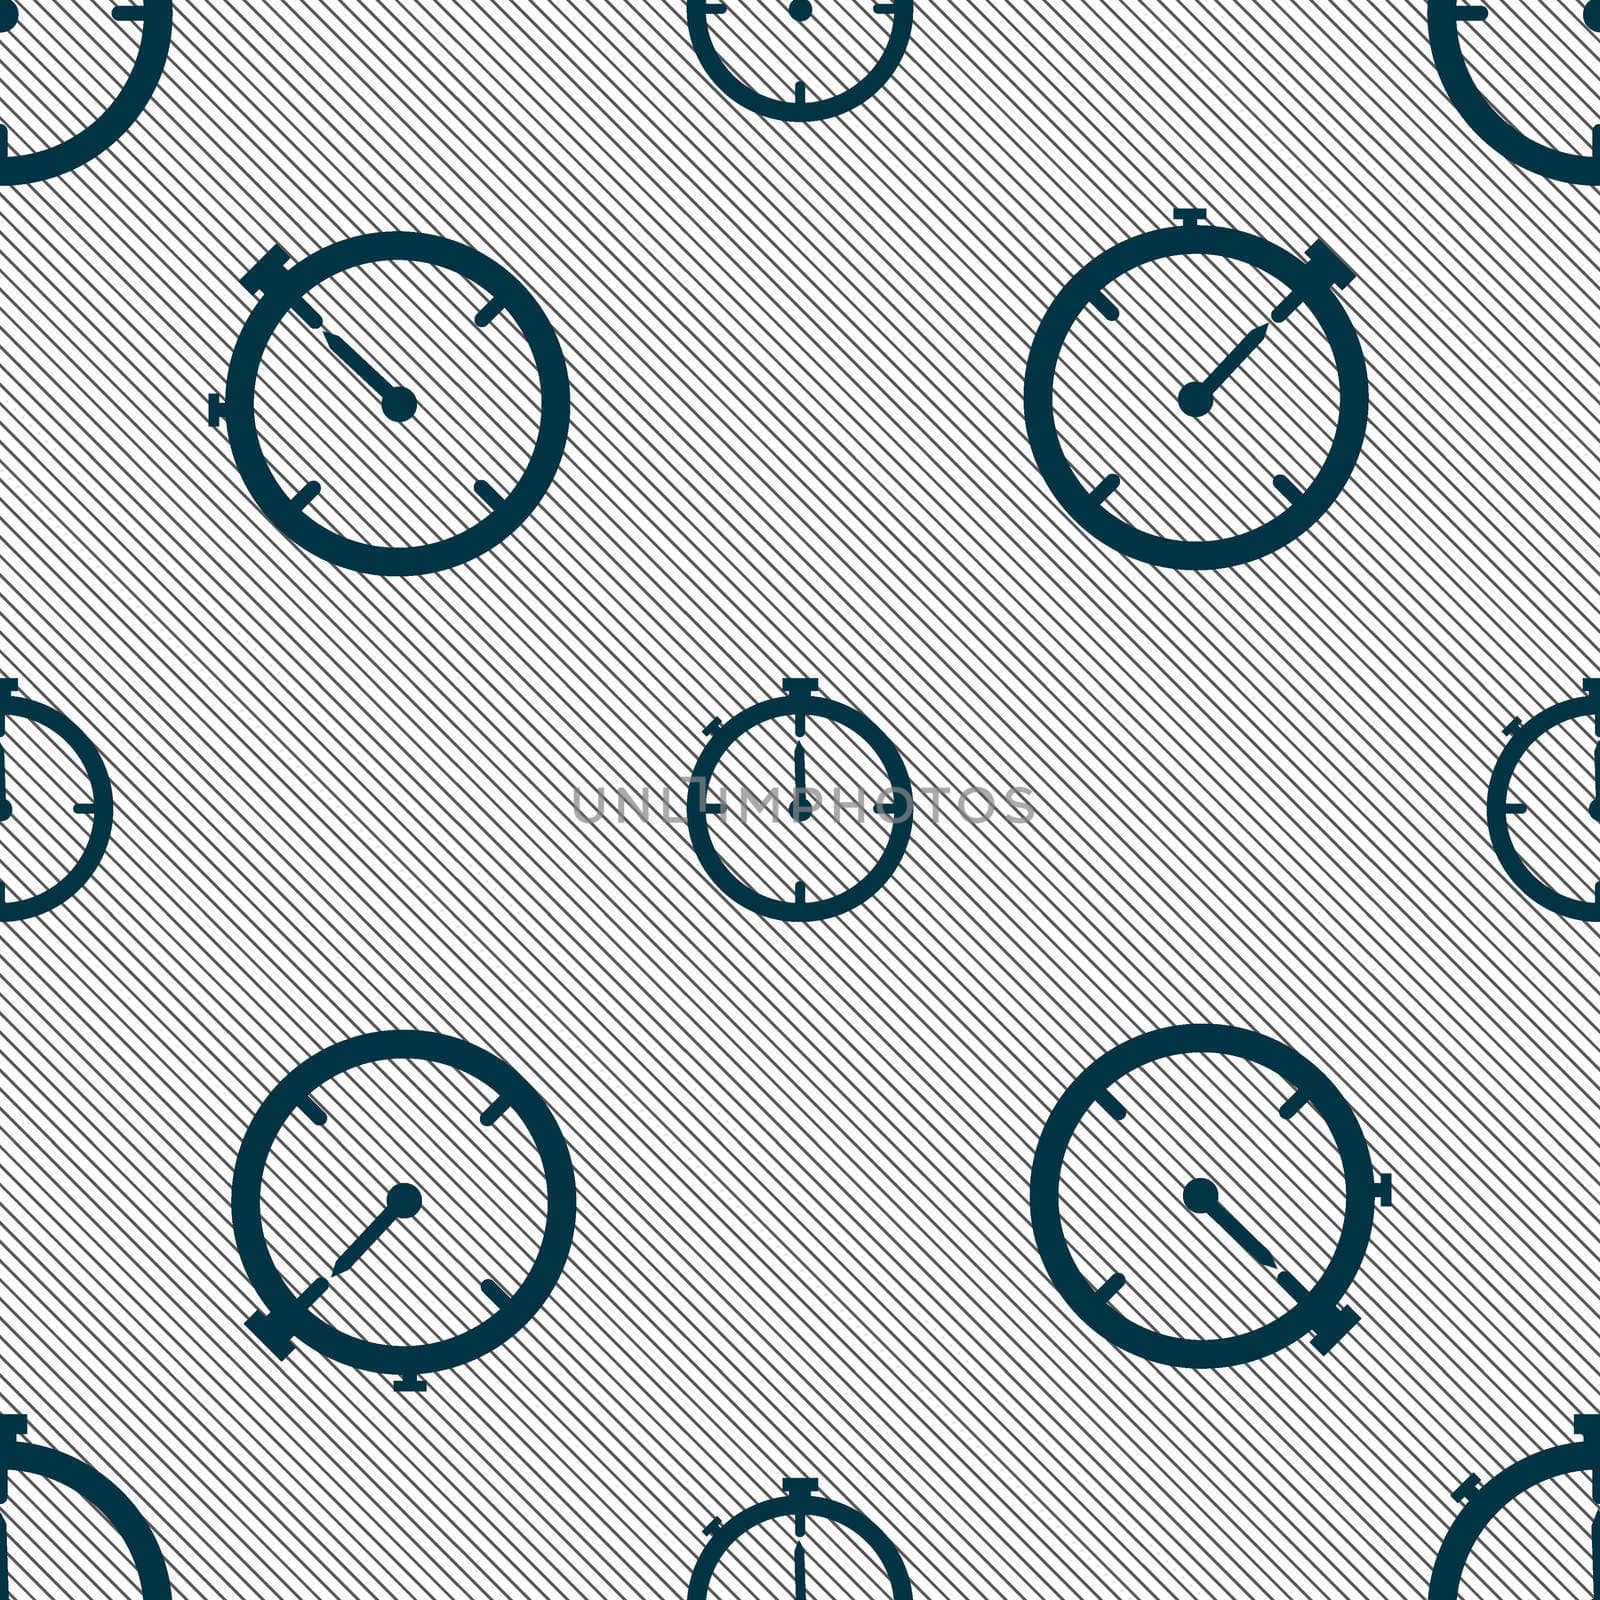 Timer sign icon. Stopwatch symbol.. Seamless pattern with geometric texture. illustration